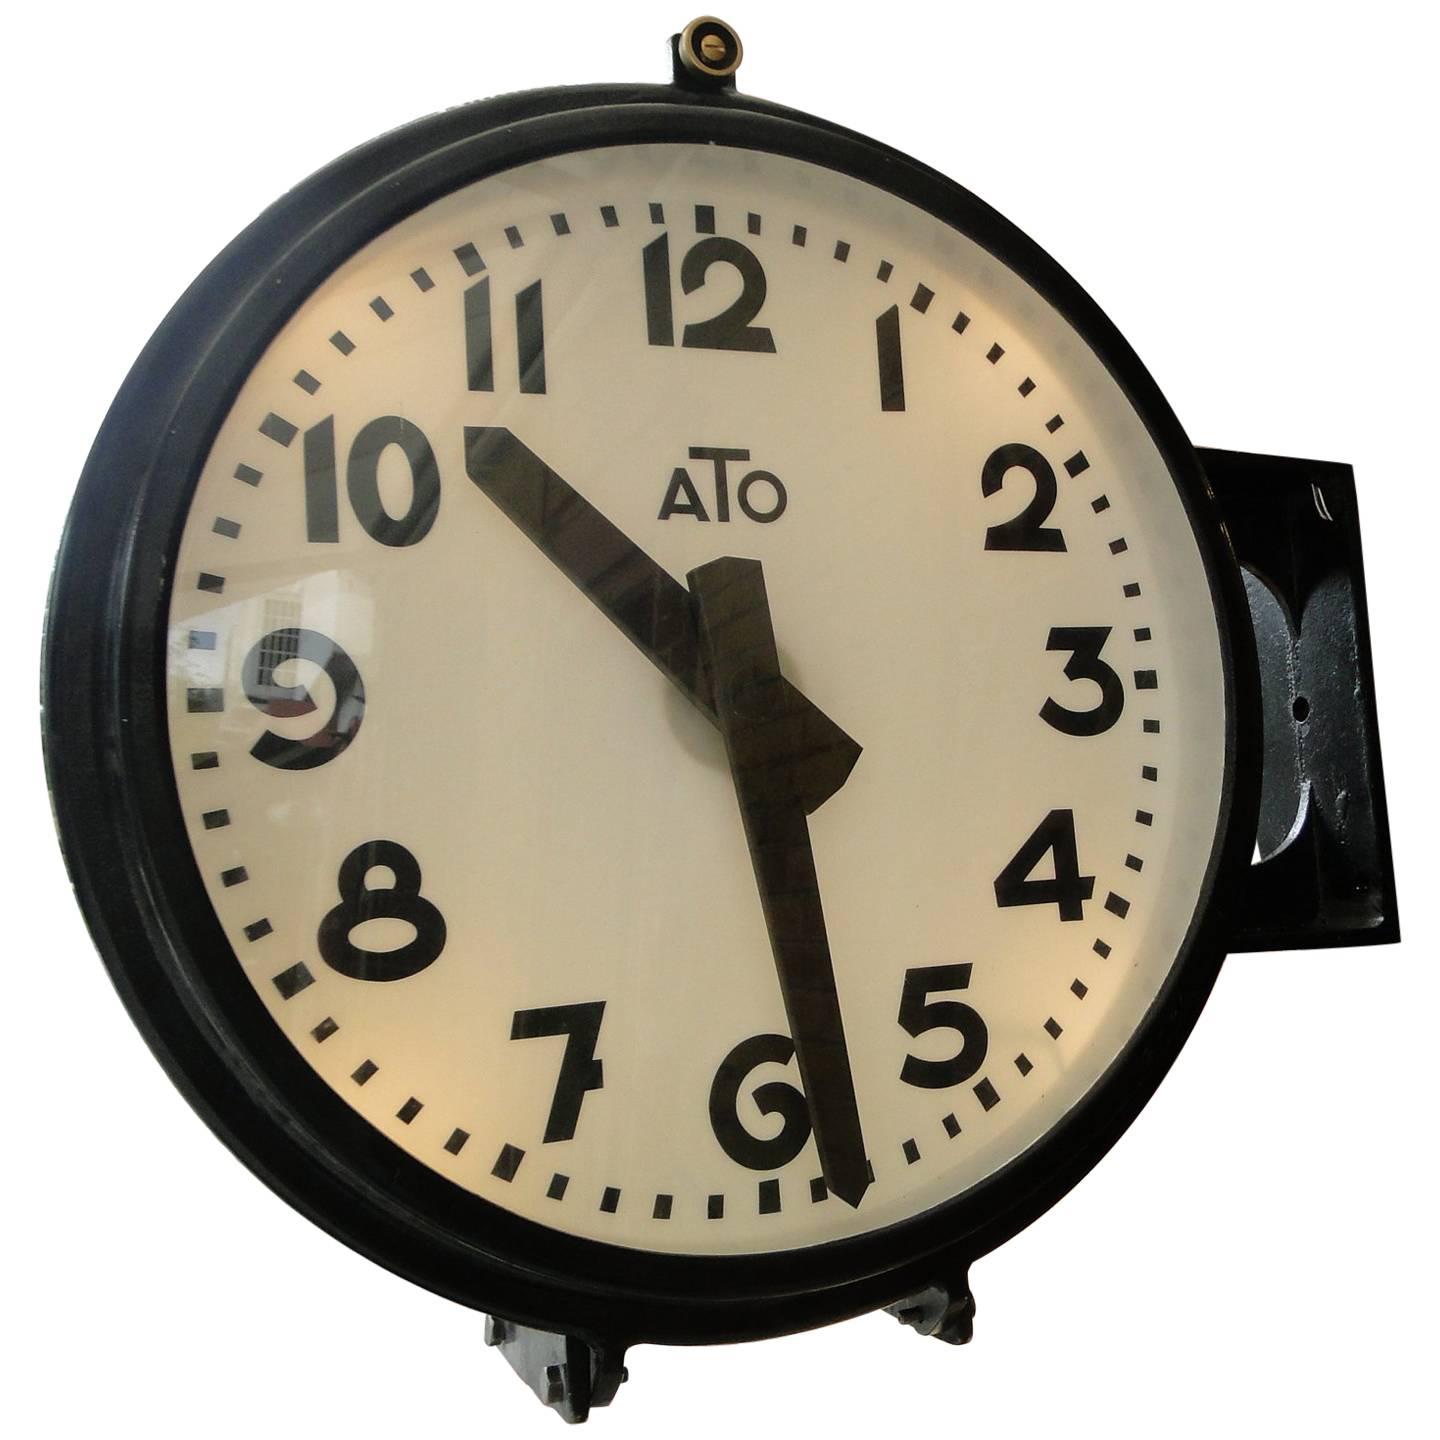 Vintage French Ato Brillie Station Railway Clock Factory Industrial Double Side For Sale